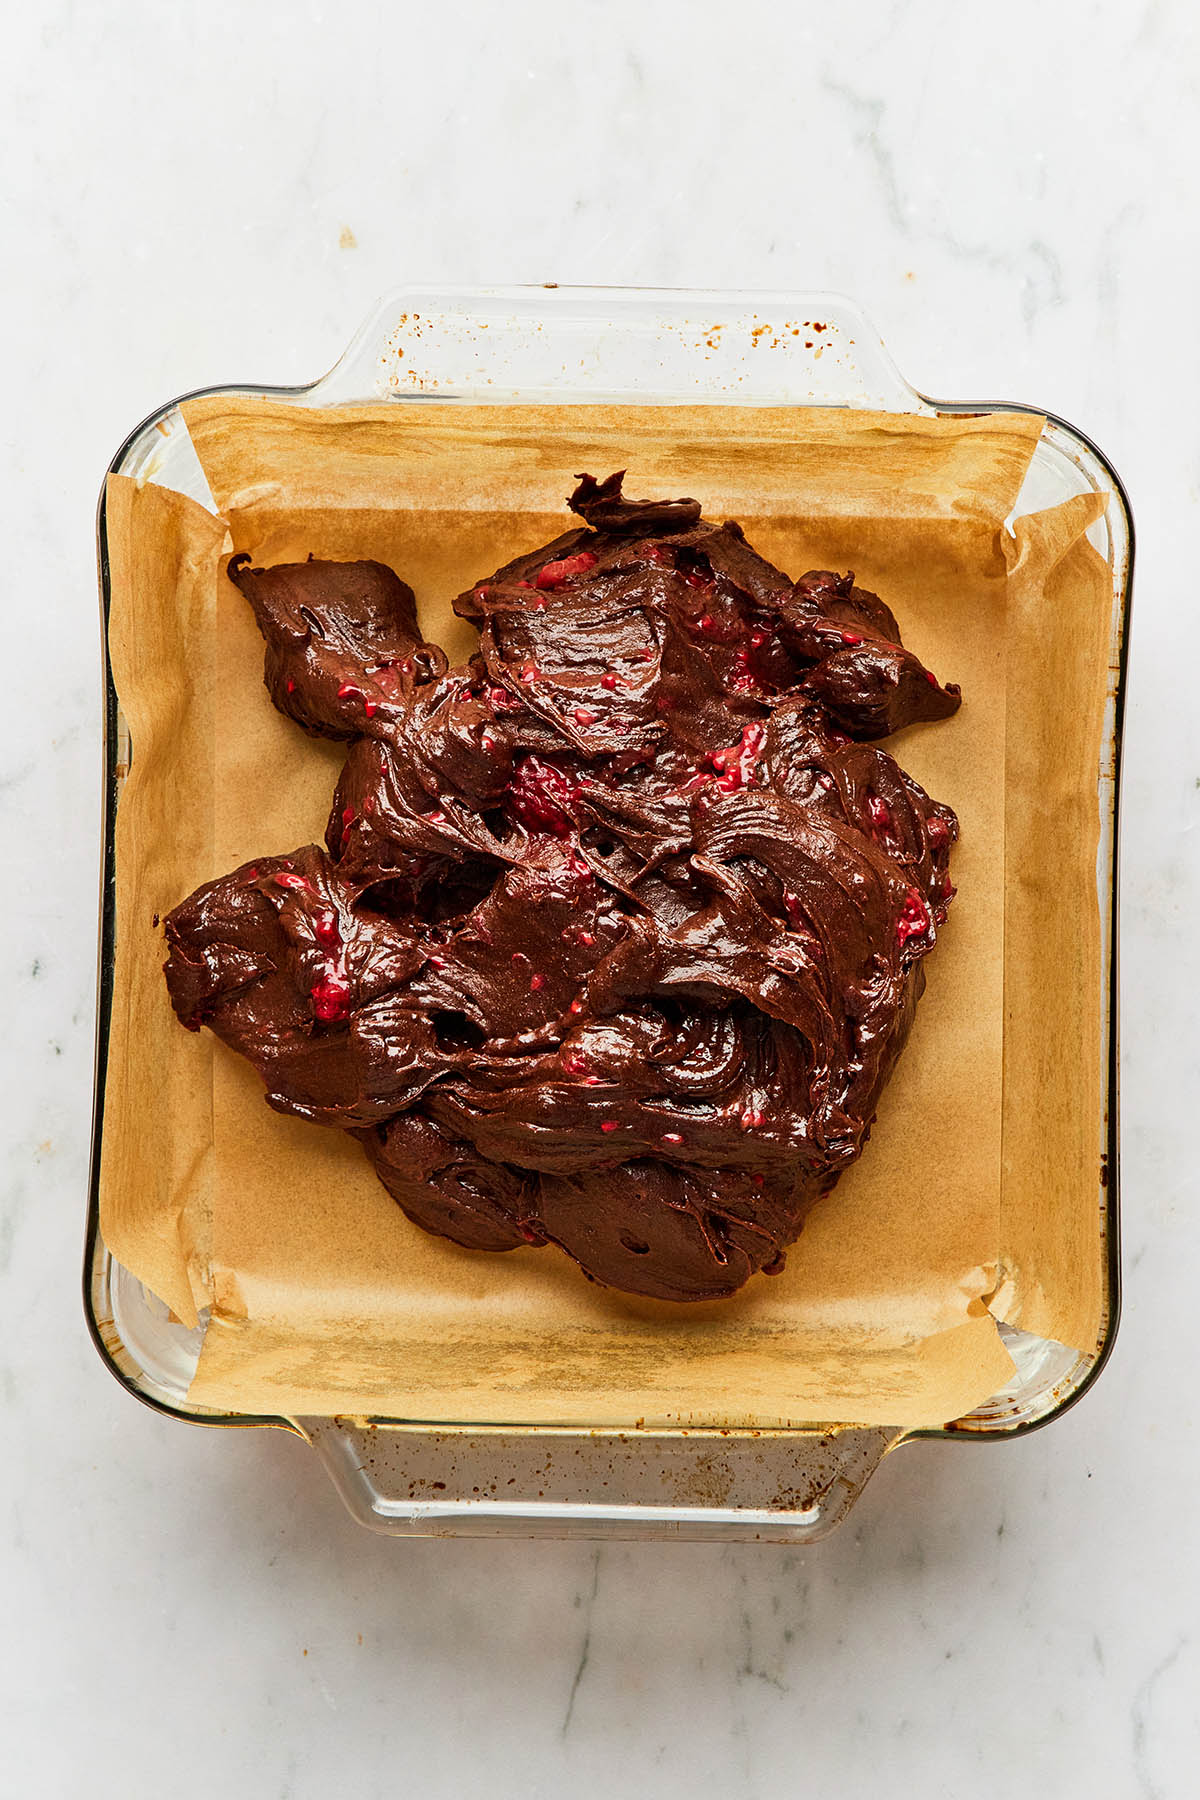 Un-smoothed chocolate batter inside a baking dish.